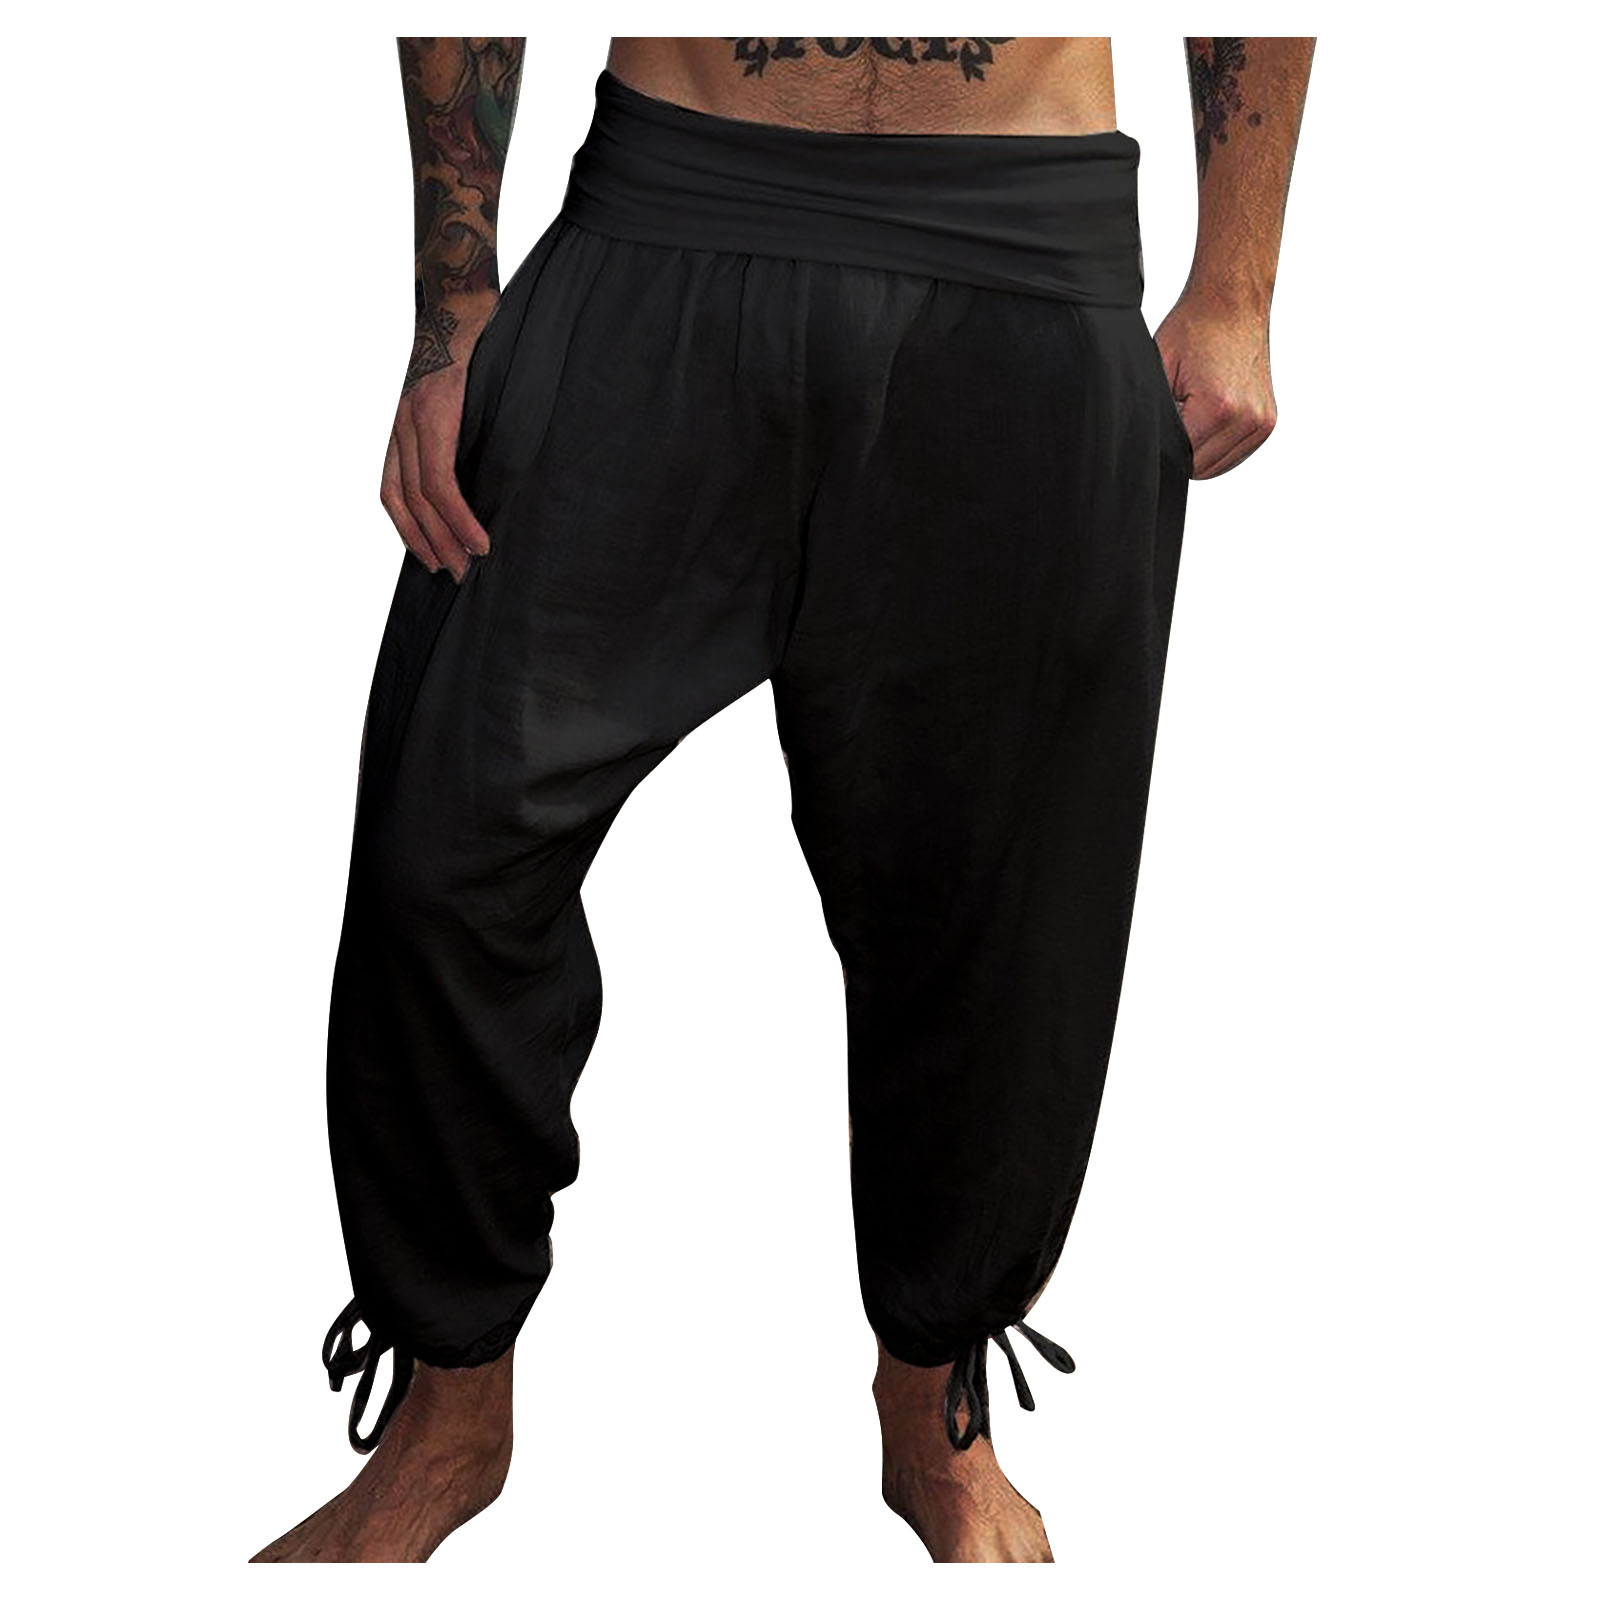 Shldybc Men's Ankle Banded Pants Medieval Pirate Costume Trousers ...